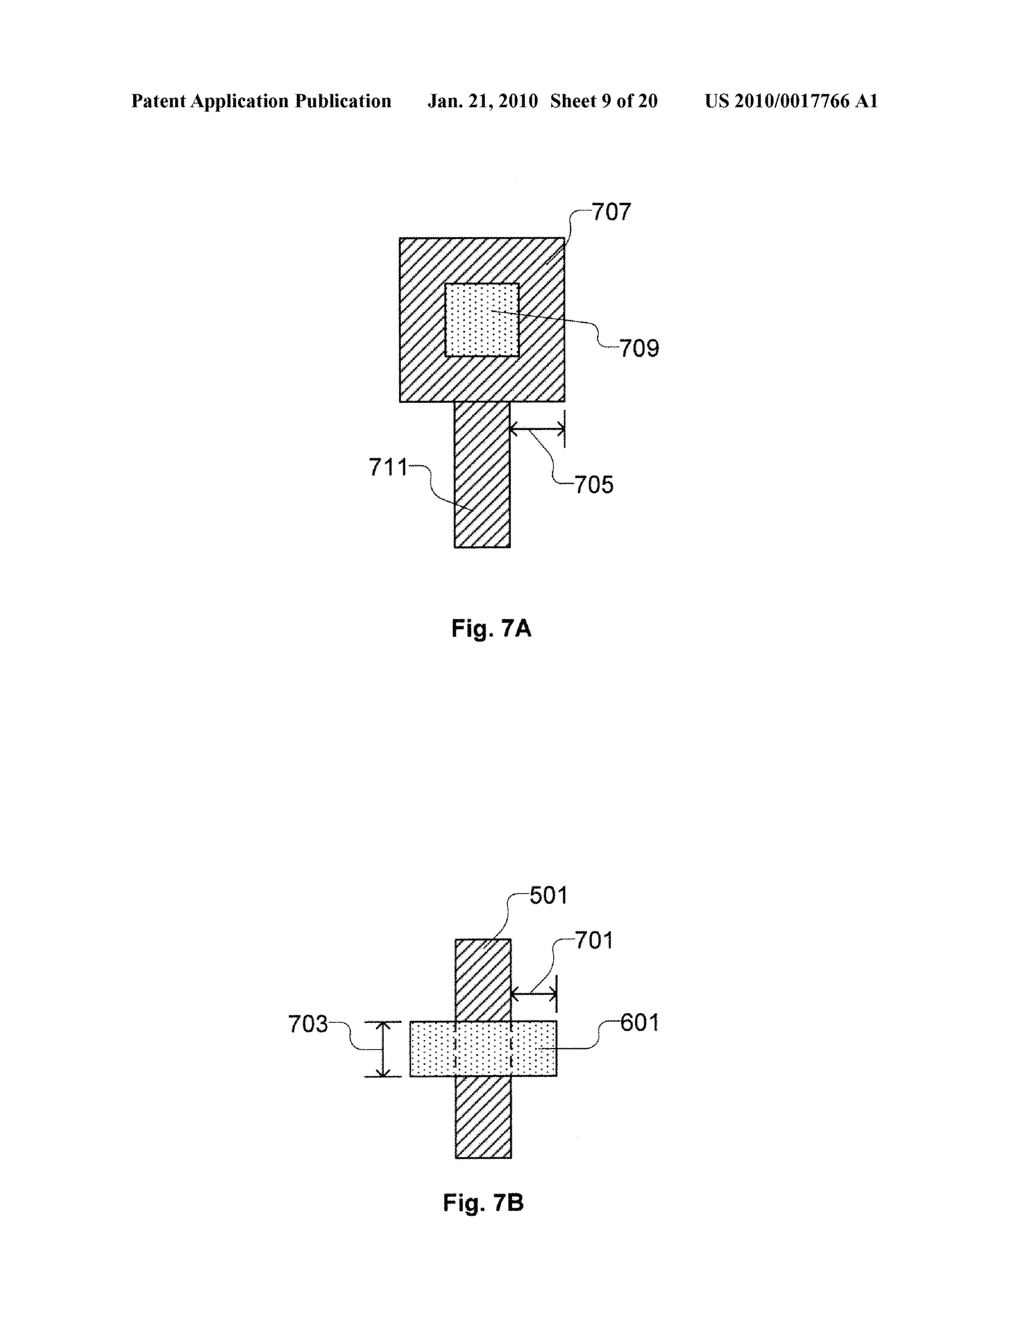 Semiconductor Device Layout Including Cell Layout Having Restricted Gate Electrode Level Layout with Linear Shaped Gate Electrode Layout Features Defined with Minimum End-to-End Spacing and At Least Eight Transistors - diagram, schematic, and image 10